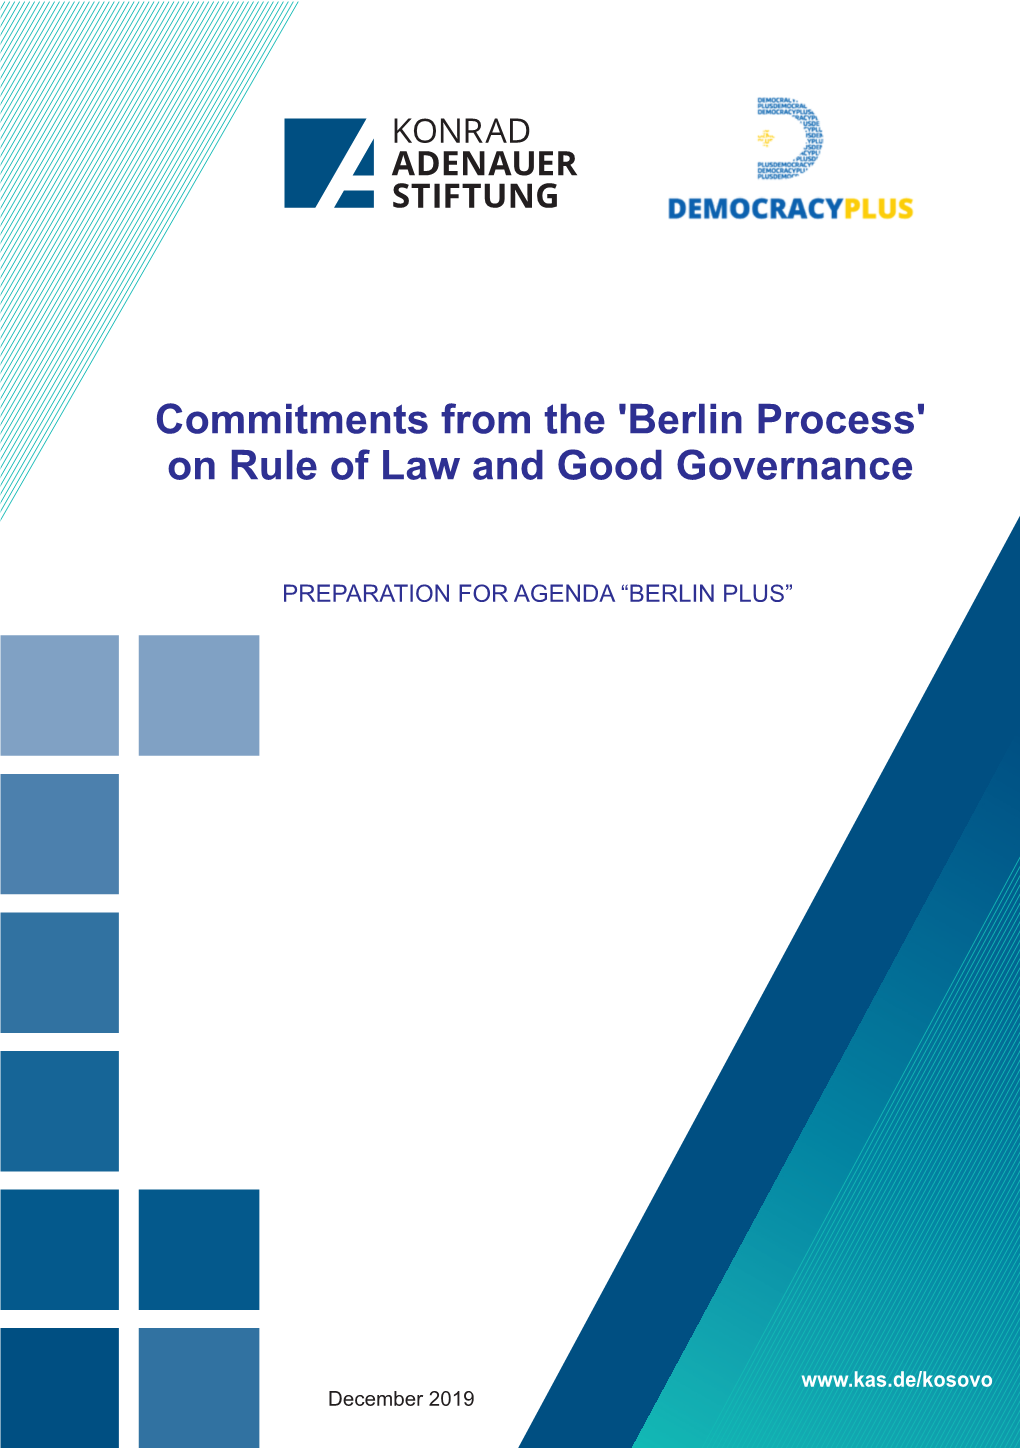 Commitments from the 'Berlin Process' on Rule of Law and Good Governance